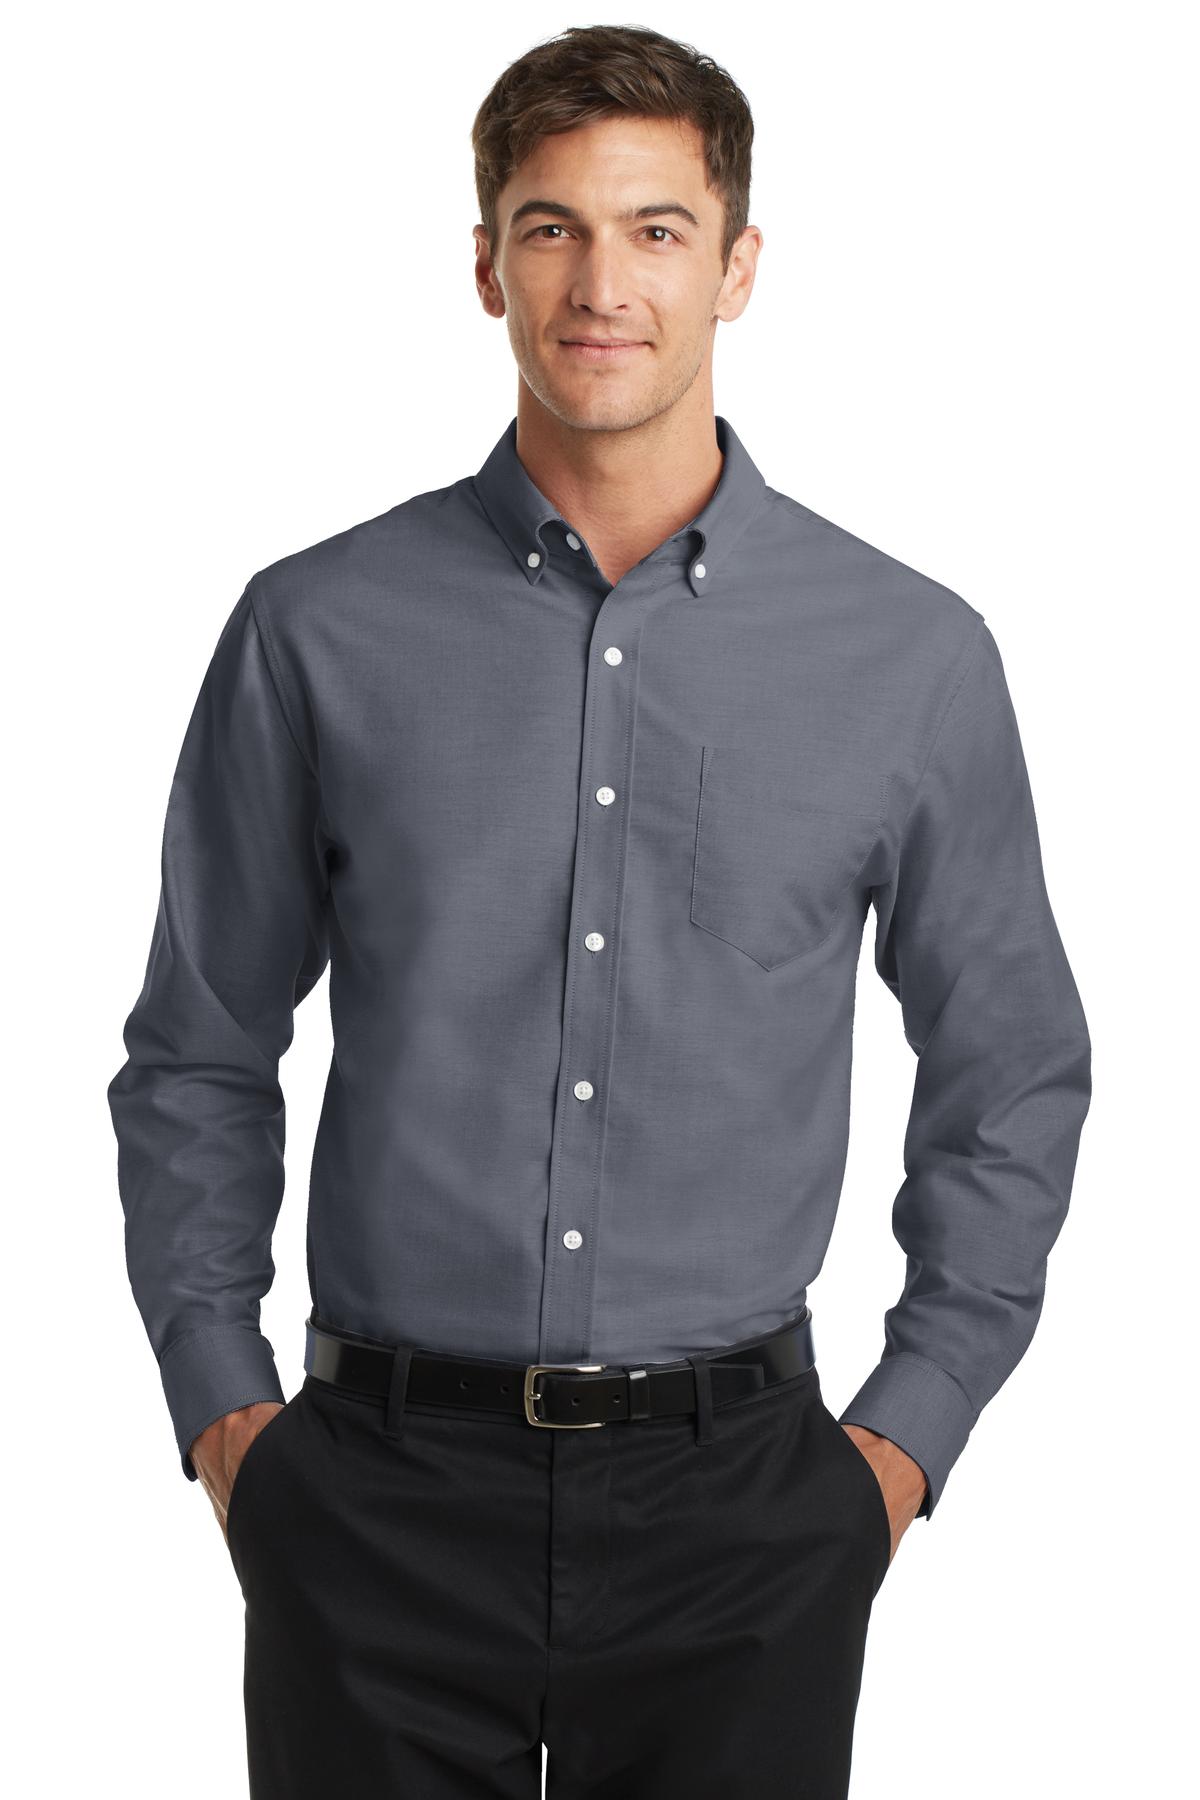 Port Authority Woven Shirts for Hospitality ® SuperPro Oxford Shirt.-Port Authority